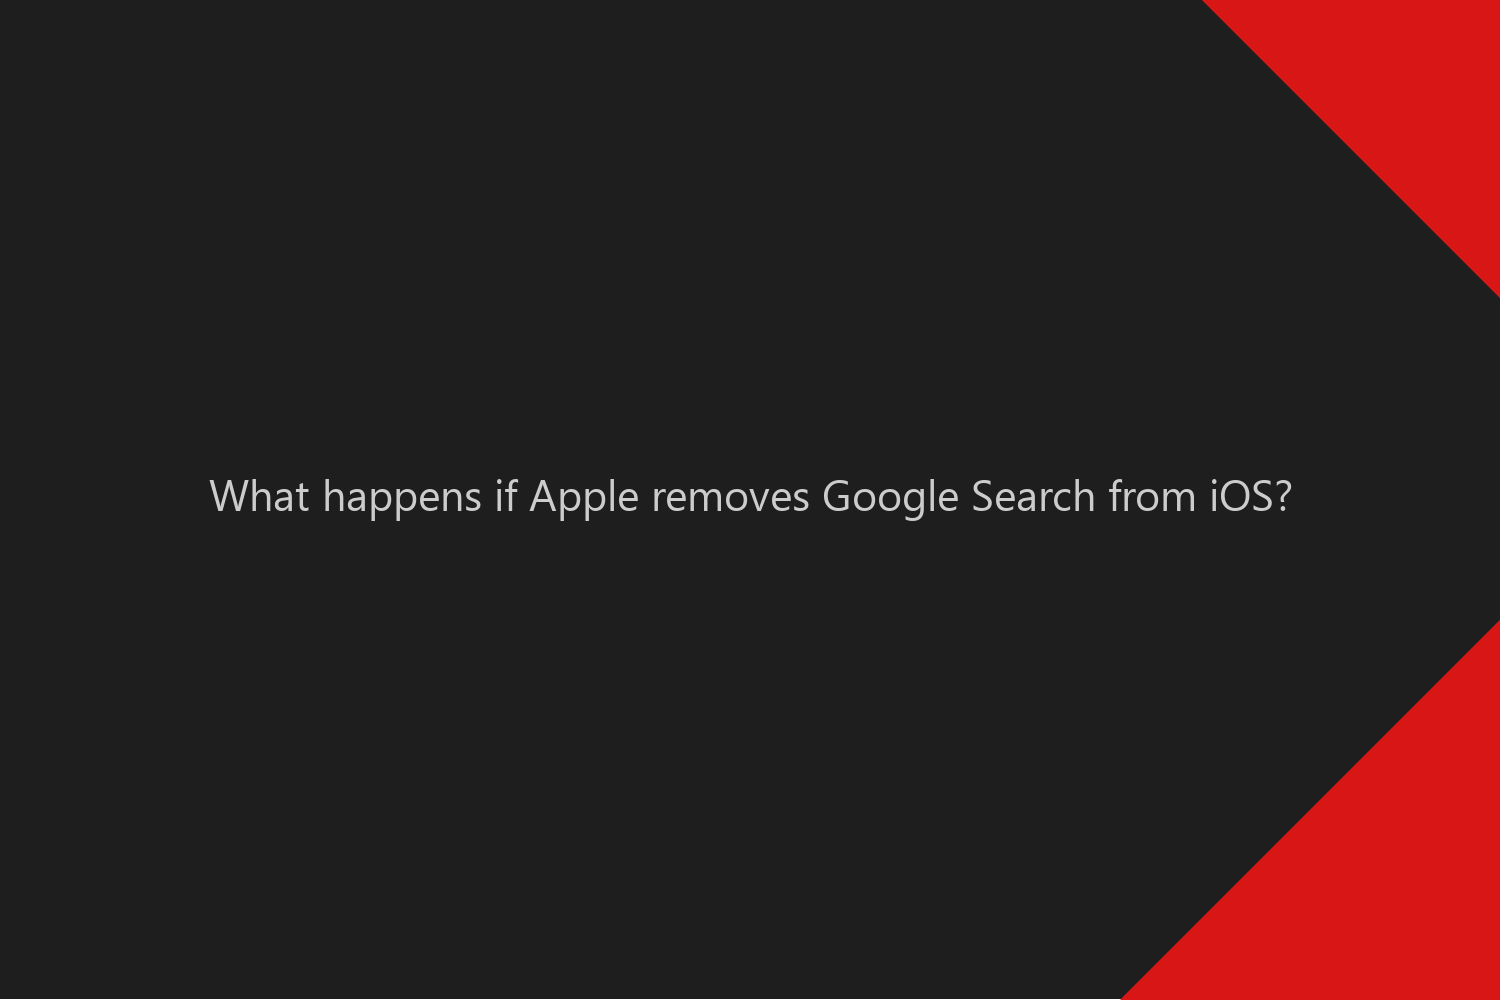 What happens if Apple removes Google Search from iOS?